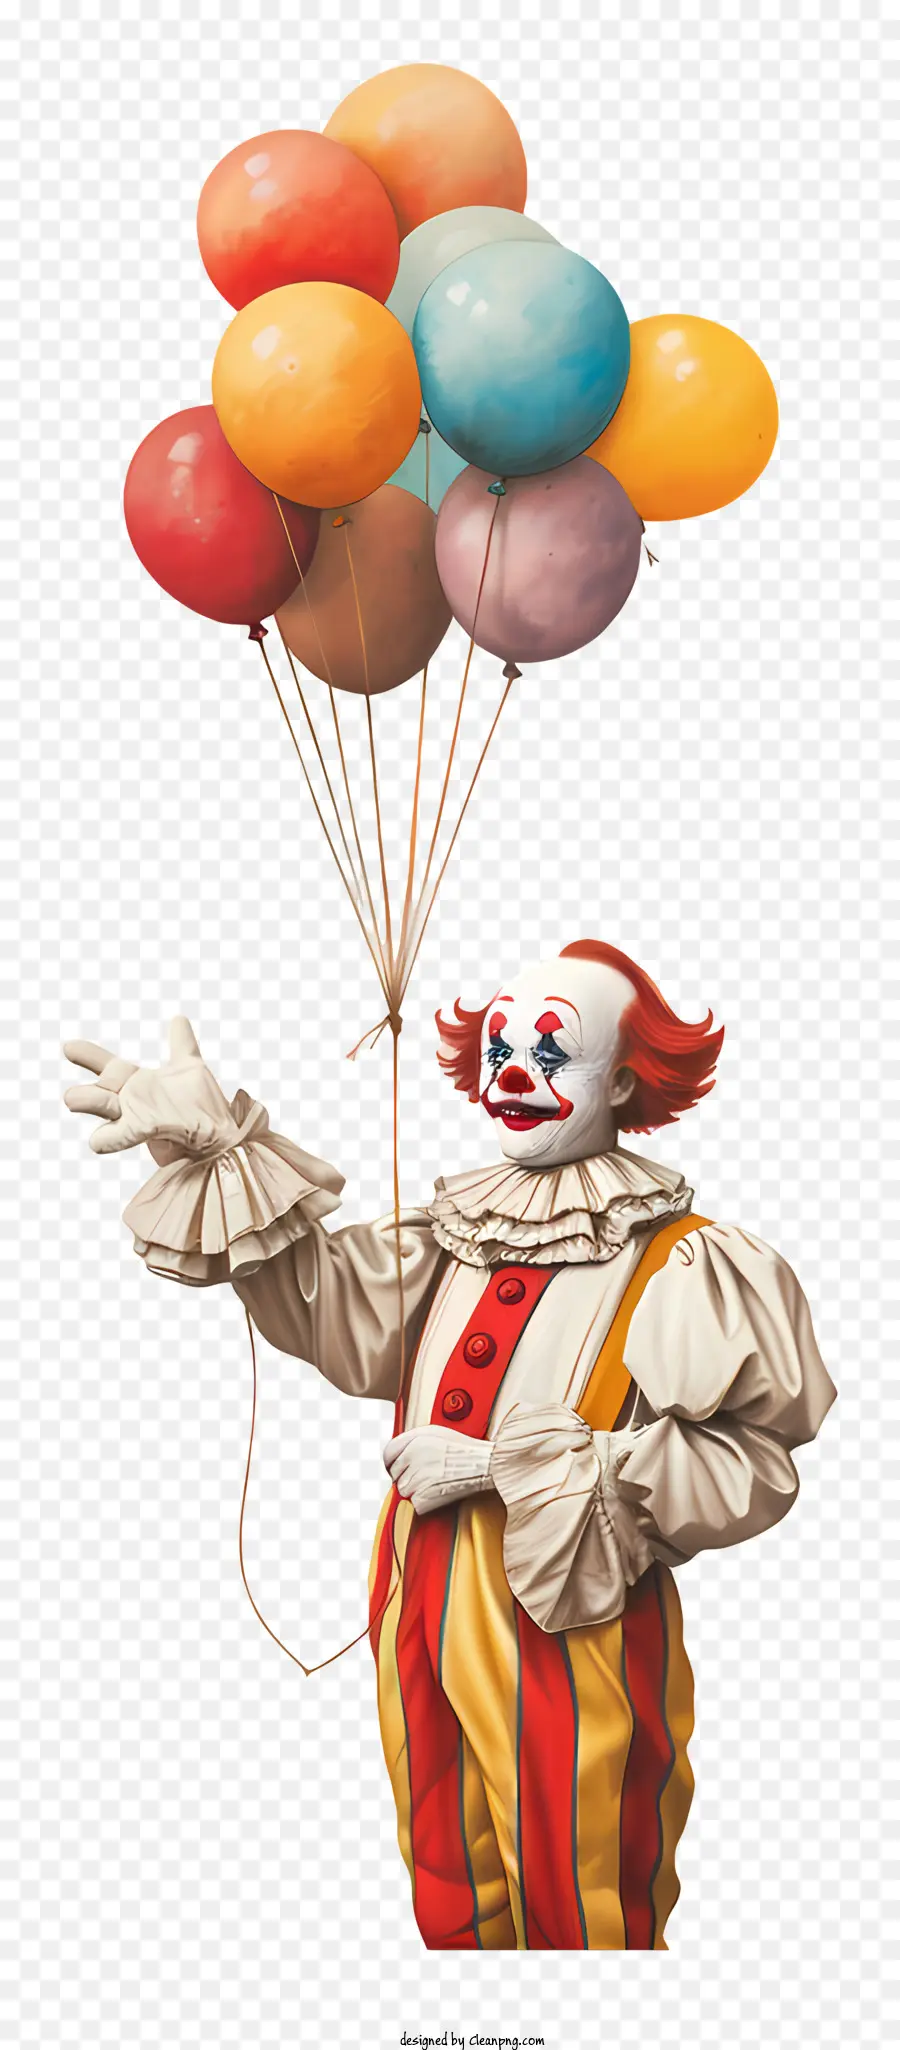 clown with balloons cartoon character clown colorful balloons large eyes